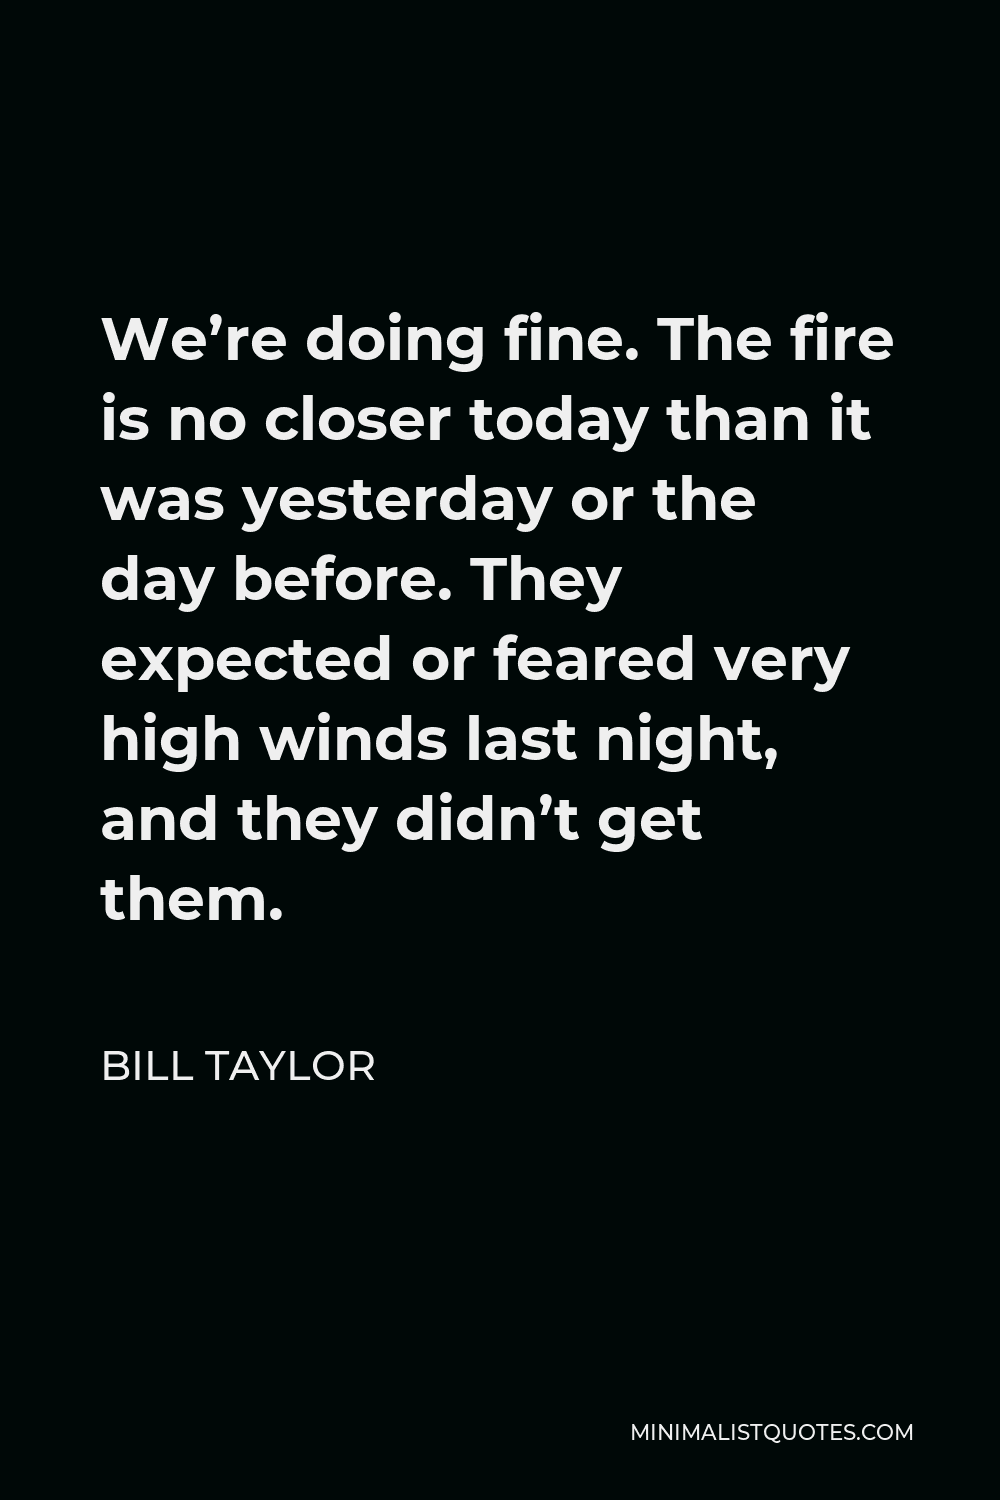 Bill Taylor Quote - We’re doing fine. The fire is no closer today than it was yesterday or the day before. They expected or feared very high winds last night, and they didn’t get them.